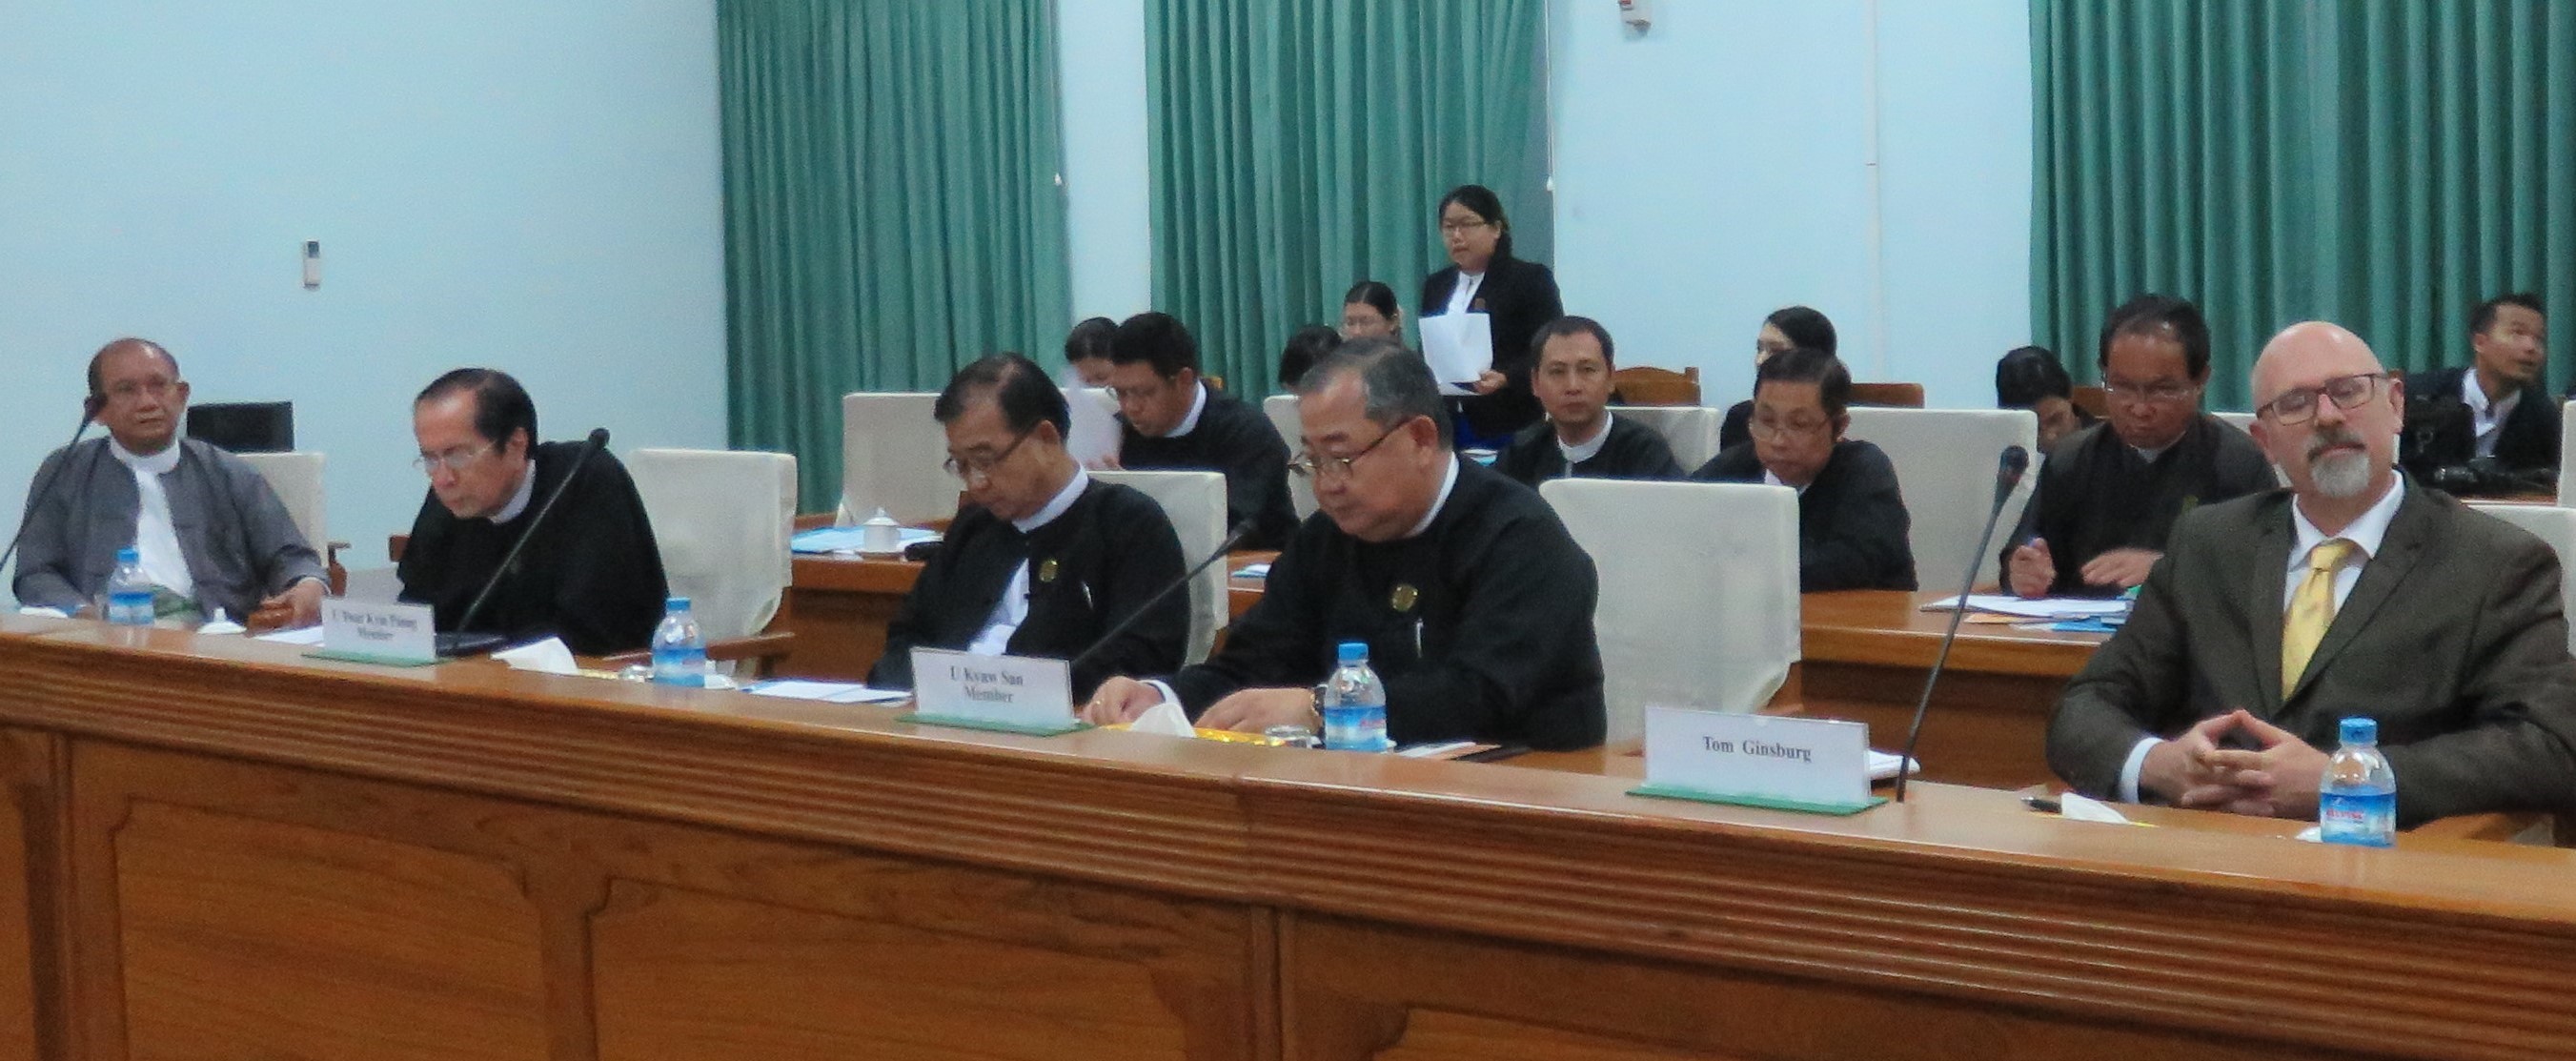 Tom Ginsburg (right) with members of the Constitutional Tribunal of the Union of Myanmar. Photo: Ohnmar Zin